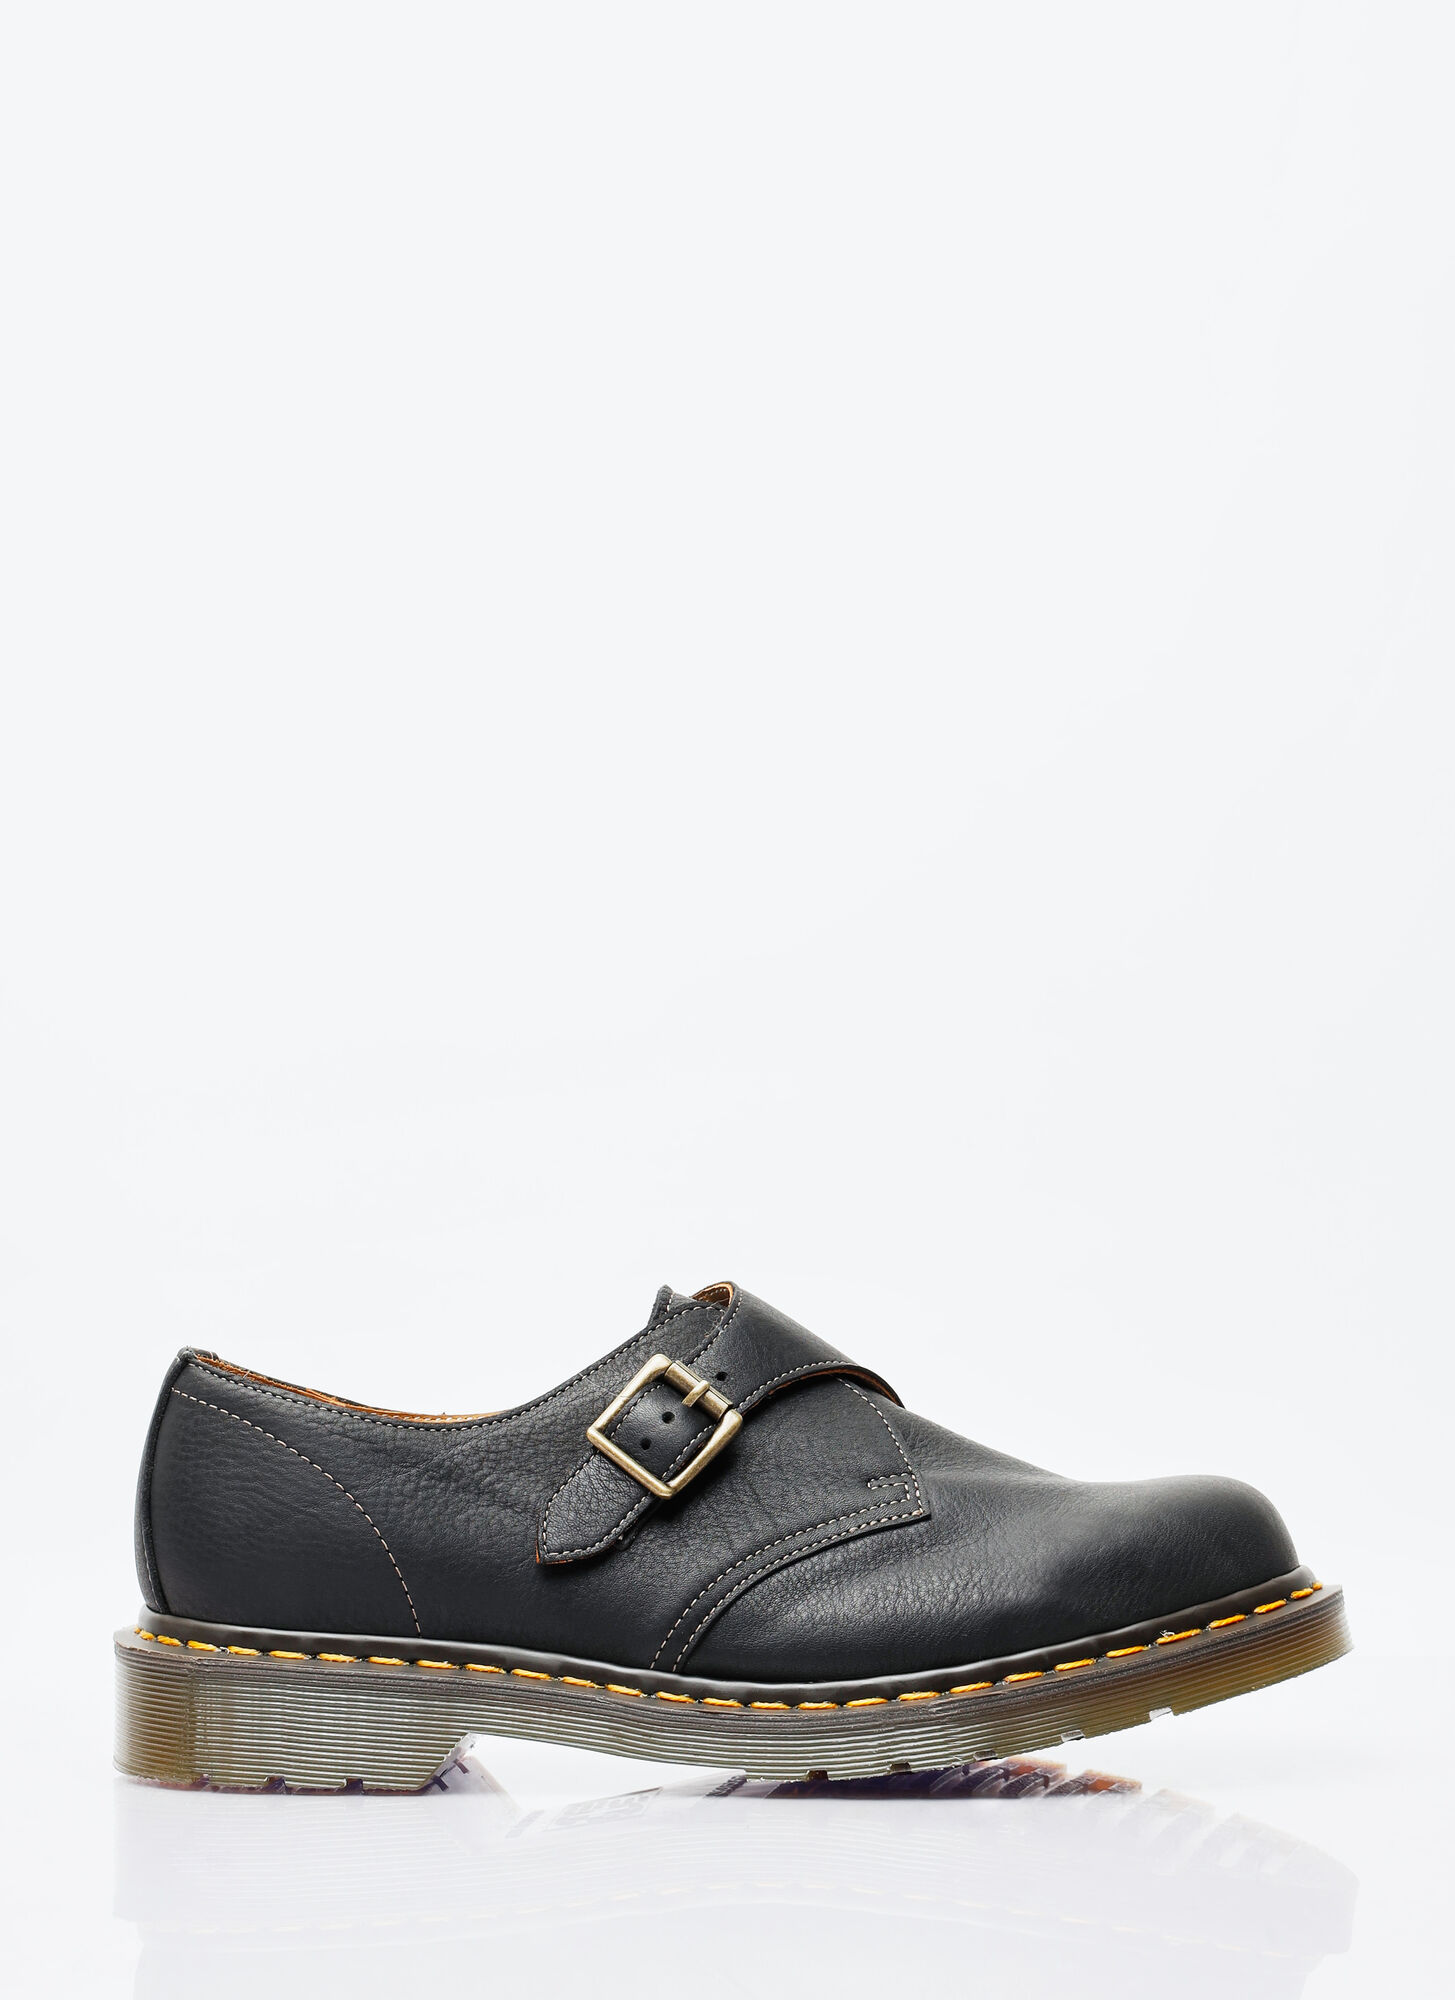 Dr. Martens' 1461 Monk Natural Tumble Leather Shoes In Black